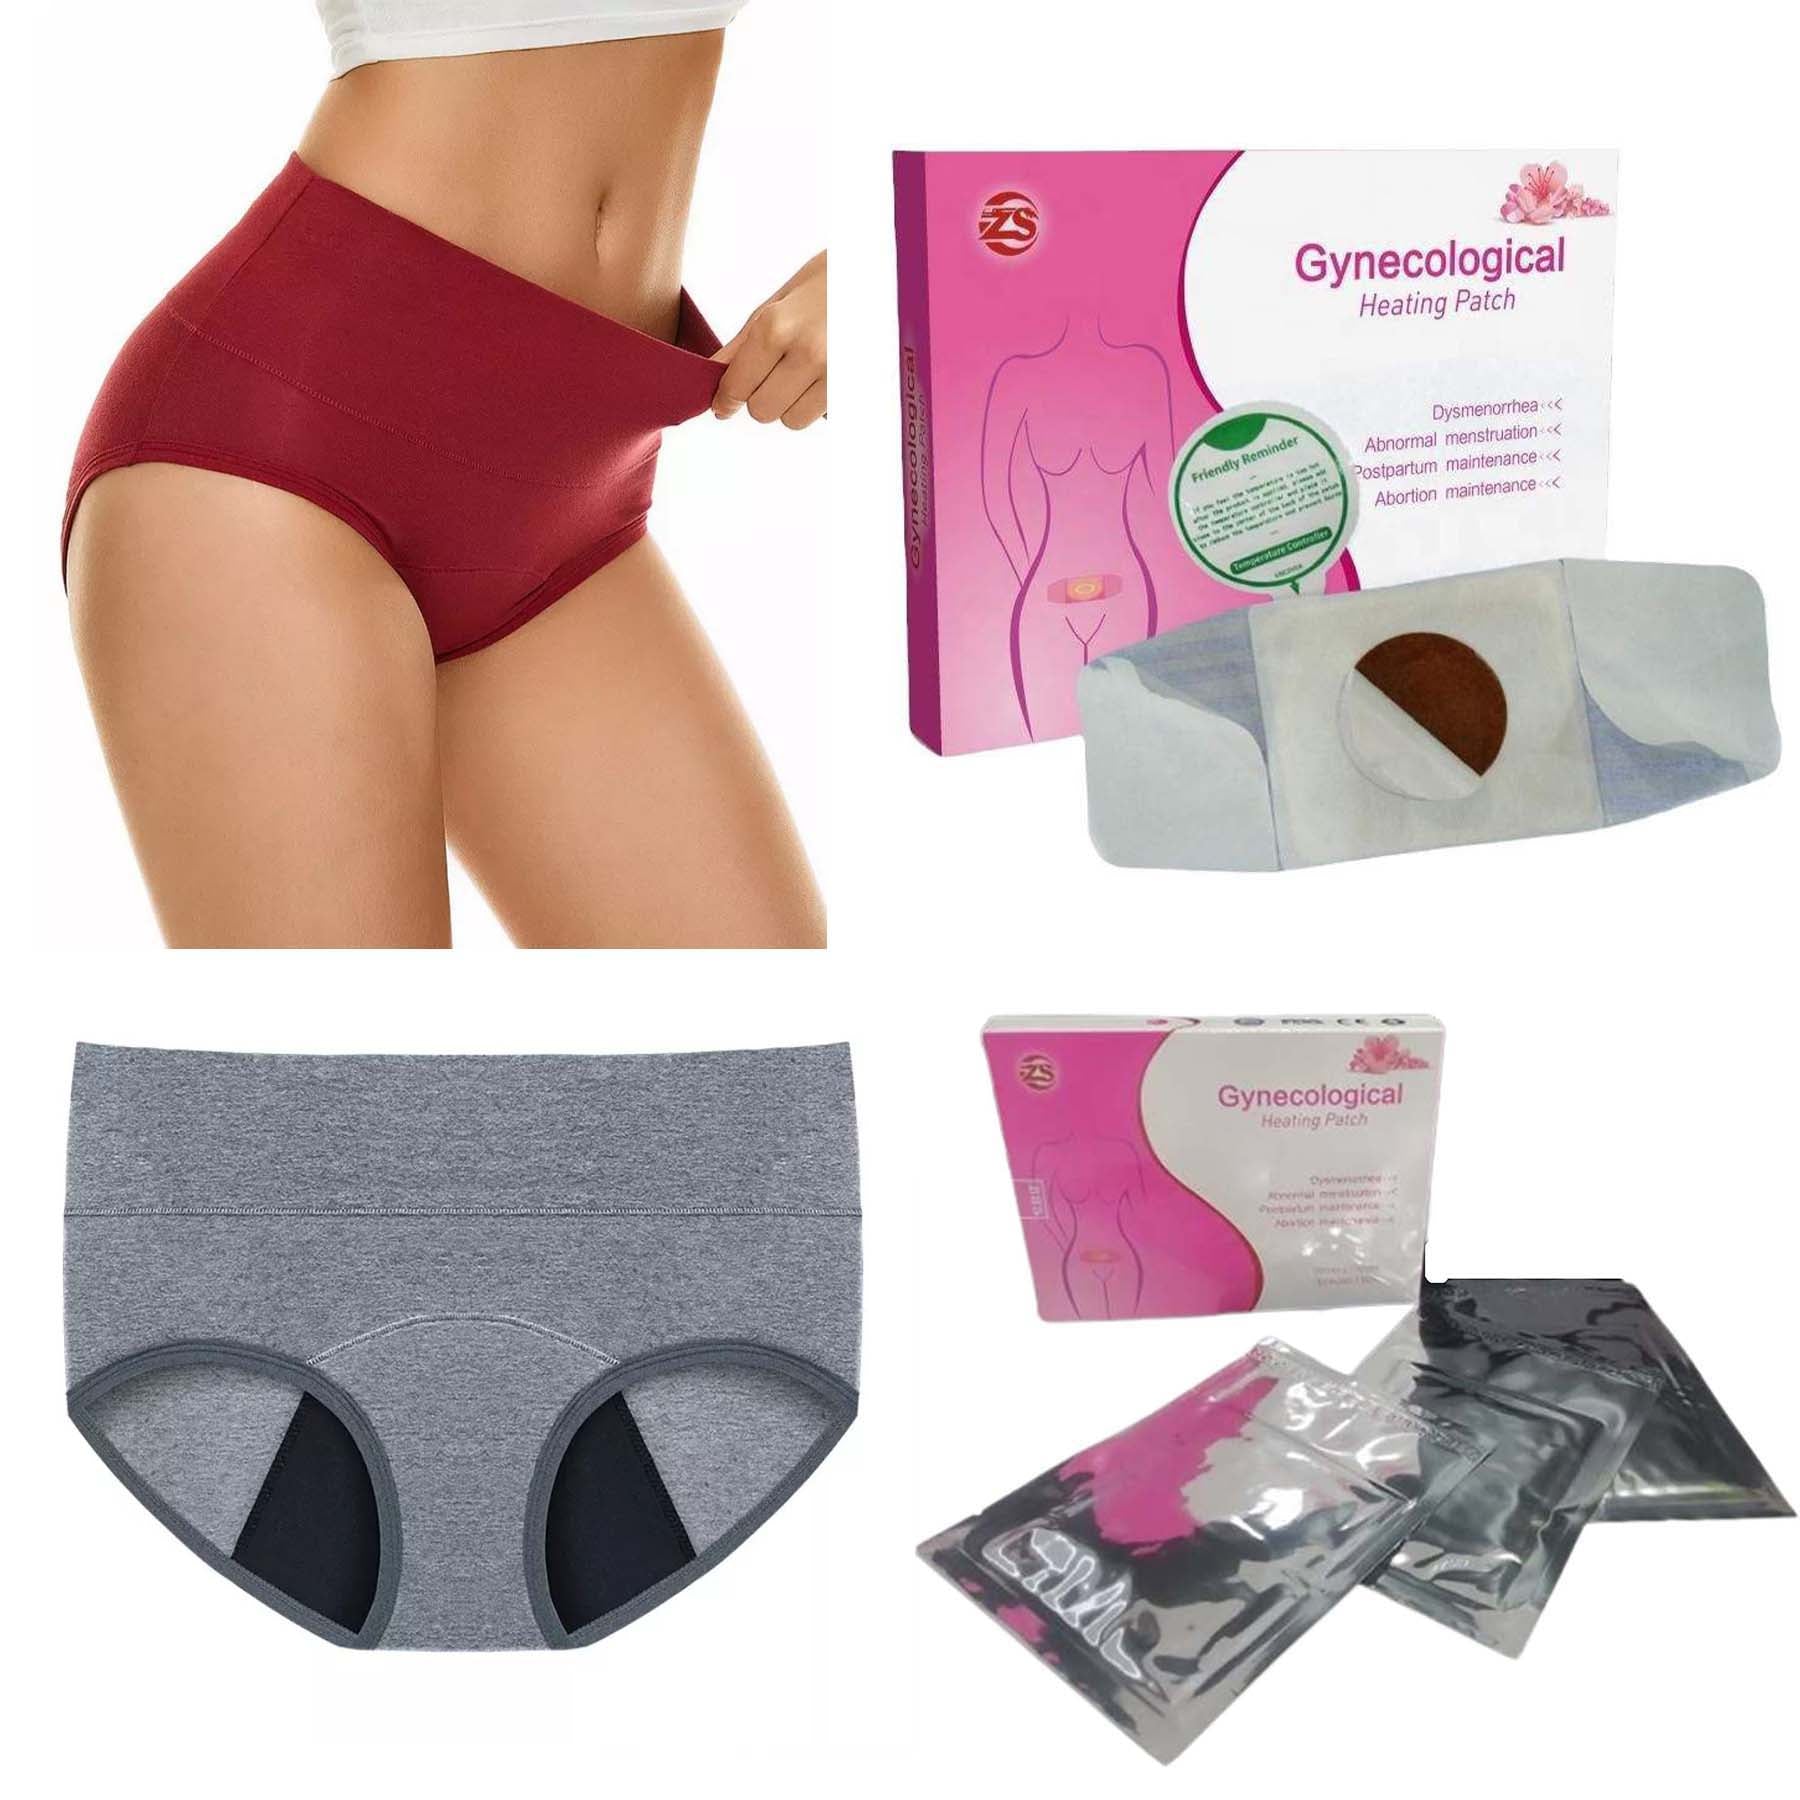 Leak Proof Protective Panties for Women/Girl Menstrual Period,Heavy  Flow,Postpartum Bleeding,Urinary Incontinence, 1PC 